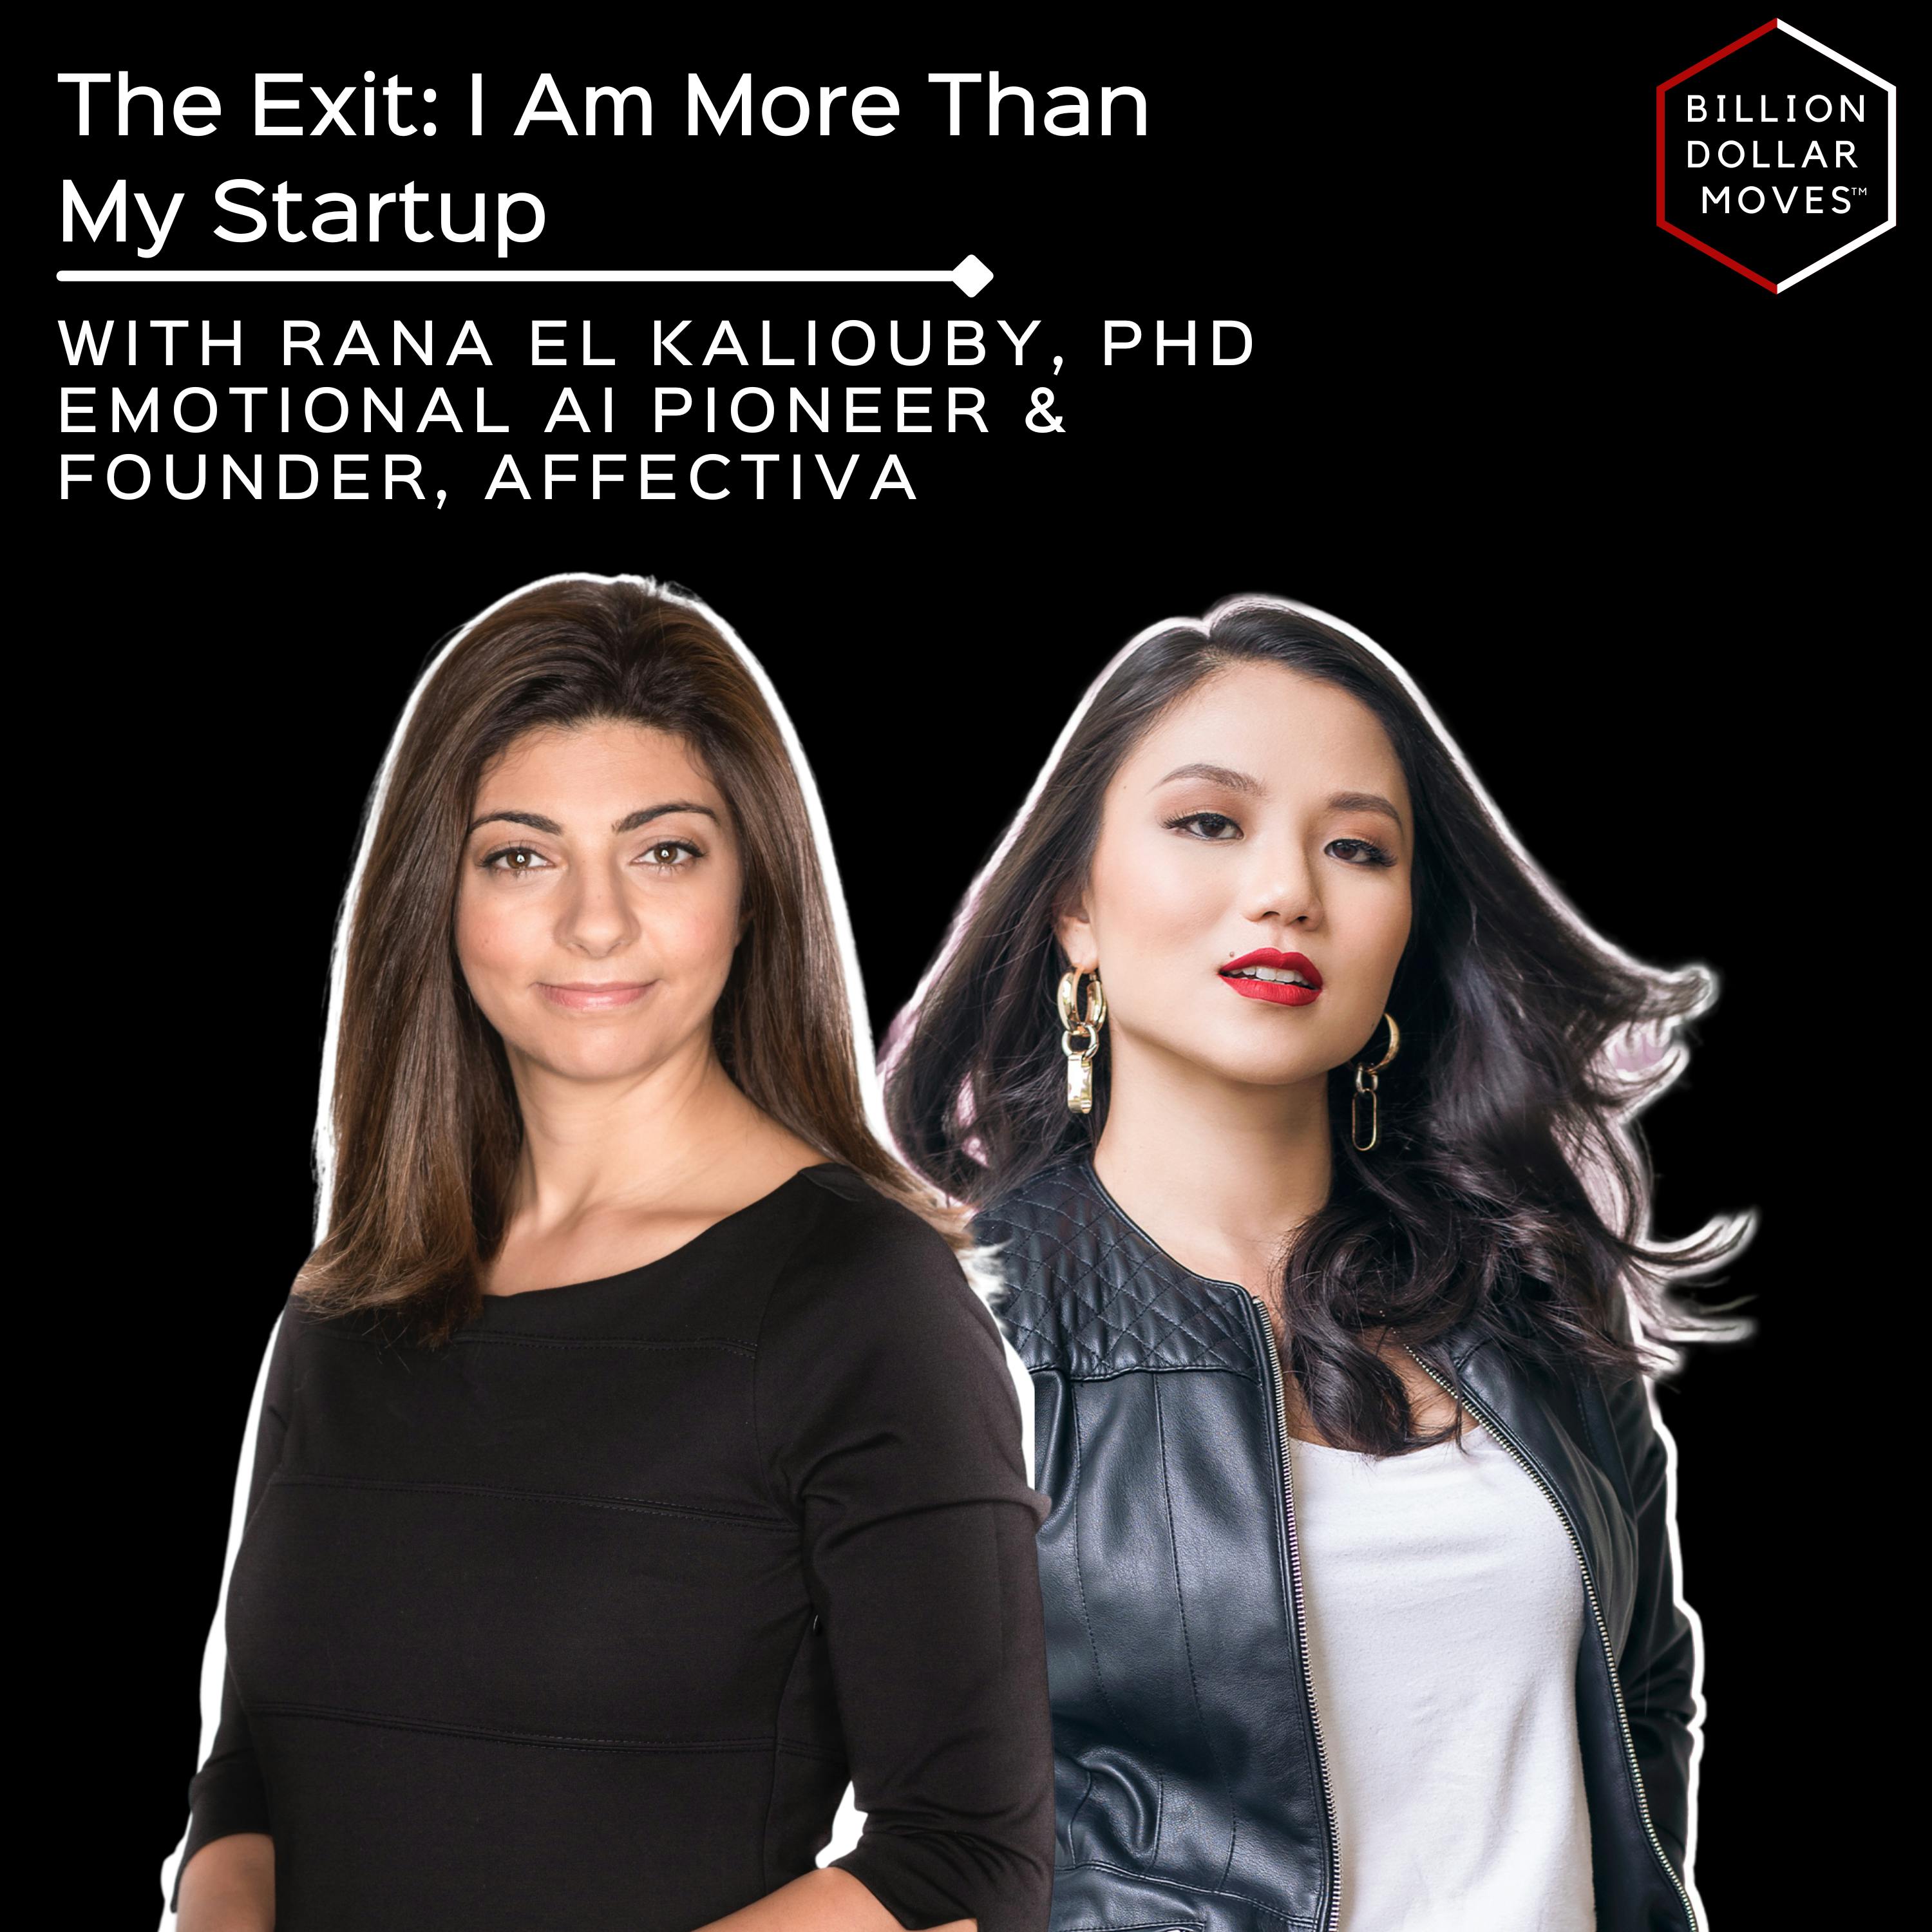 The Exit: Decoupling my Identity from my Startup with Rana el Kaliouby, Founder, Affectiva & Emotional AI Pioneer